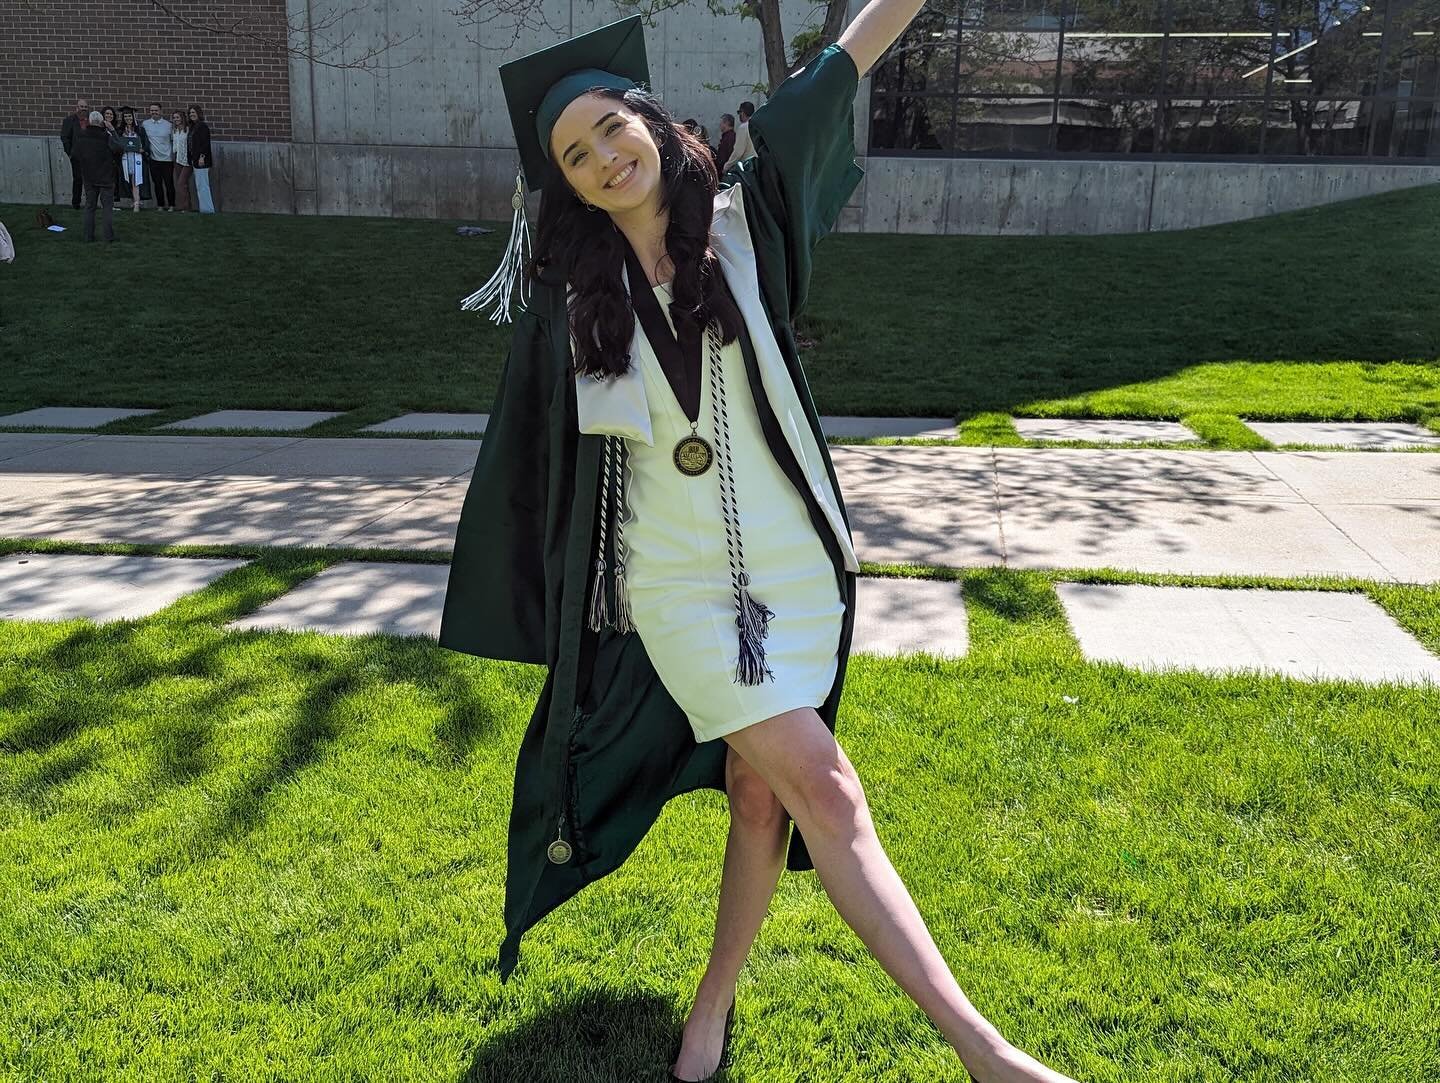 This last weekend was a whirlwind trip to Utah for a few days to celebrate our daughter, Morgan, graduating from UVU&rsquo;s psychology program, and our daughter-in-law, Marin, graduating from BYU&rsquo;s nursing program!👩&zwj;🎓👏🎉🥳. So extremely